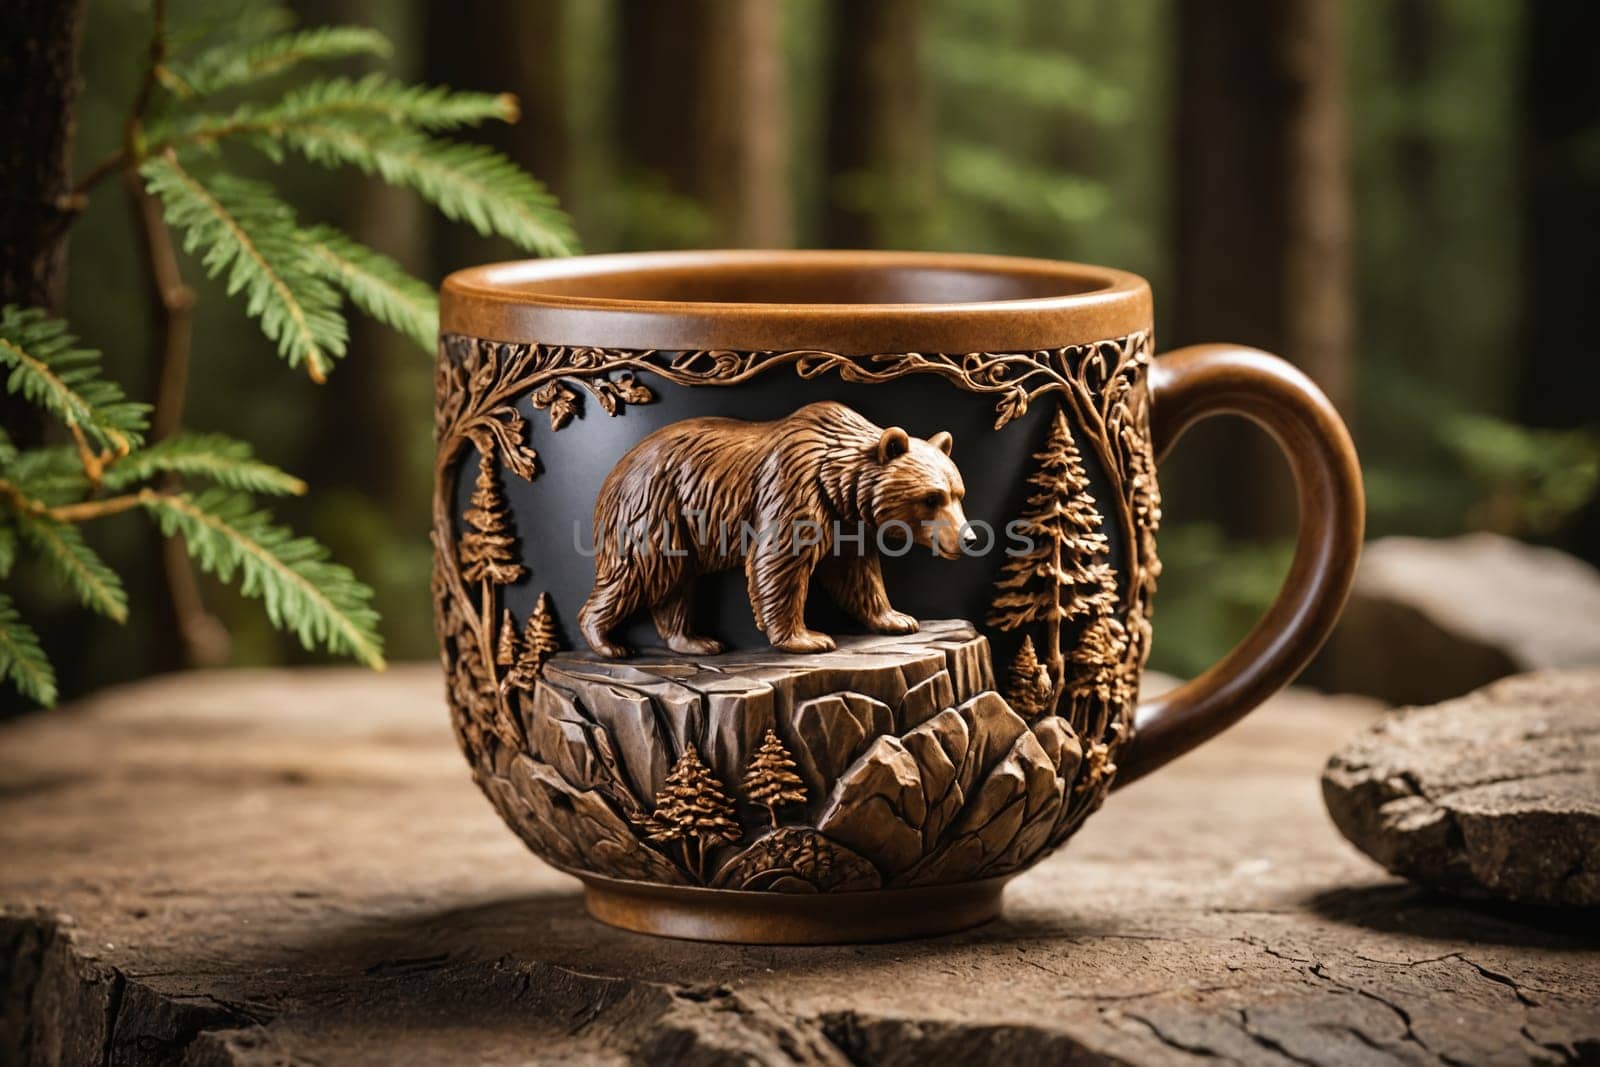 Rustic Wilderness Mug: Bear and Mountain Landscape Design by Andre1ns